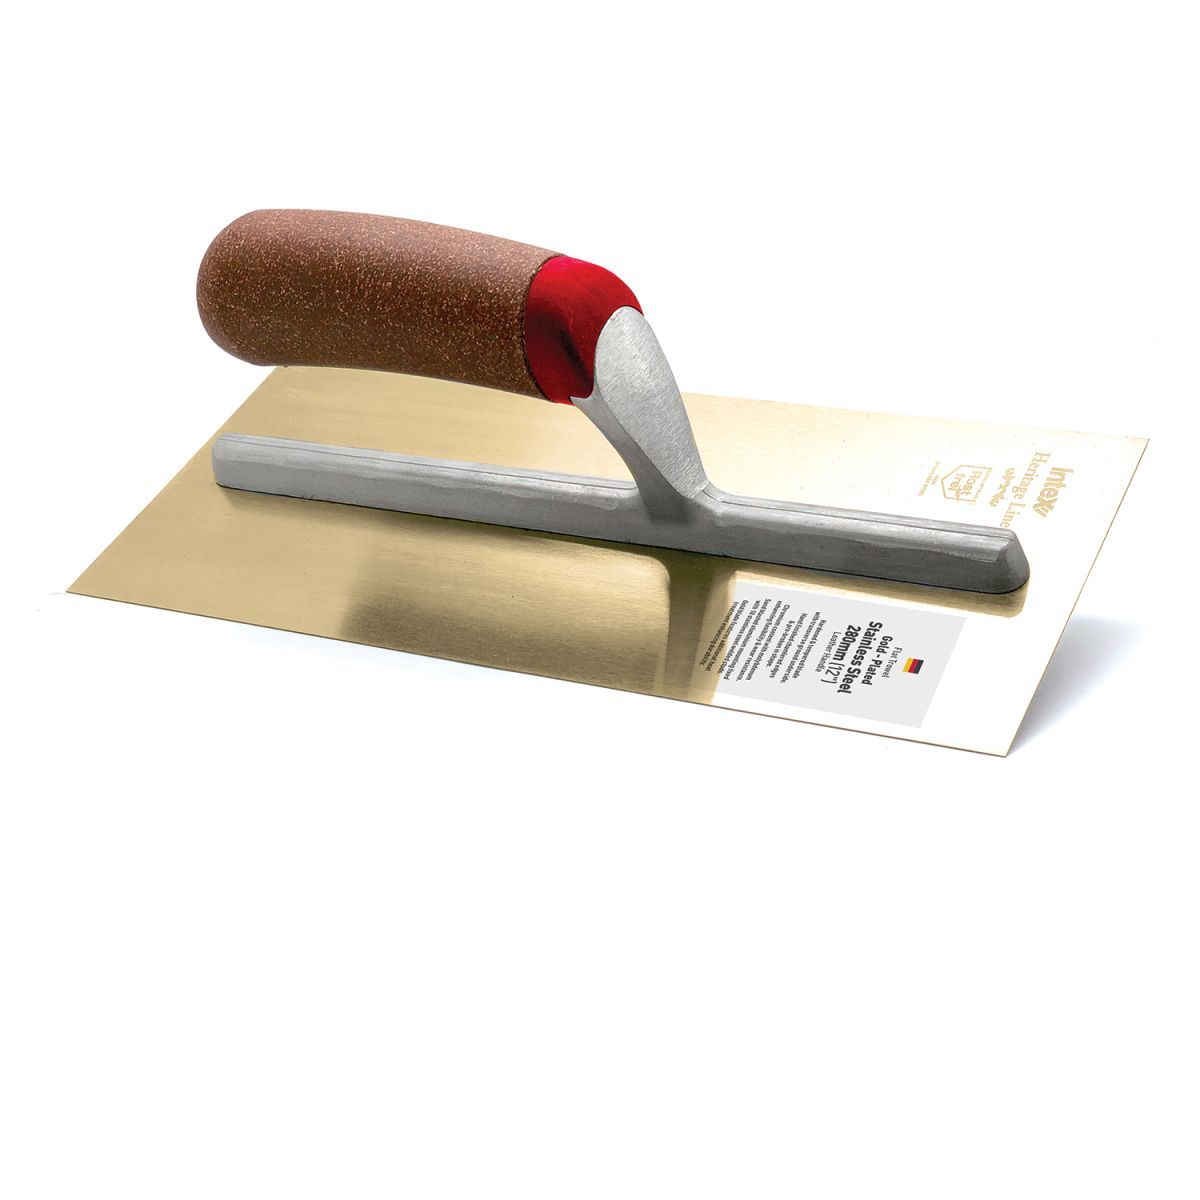 Heritage Golden Stainless Steel Trowels with Cork Handles